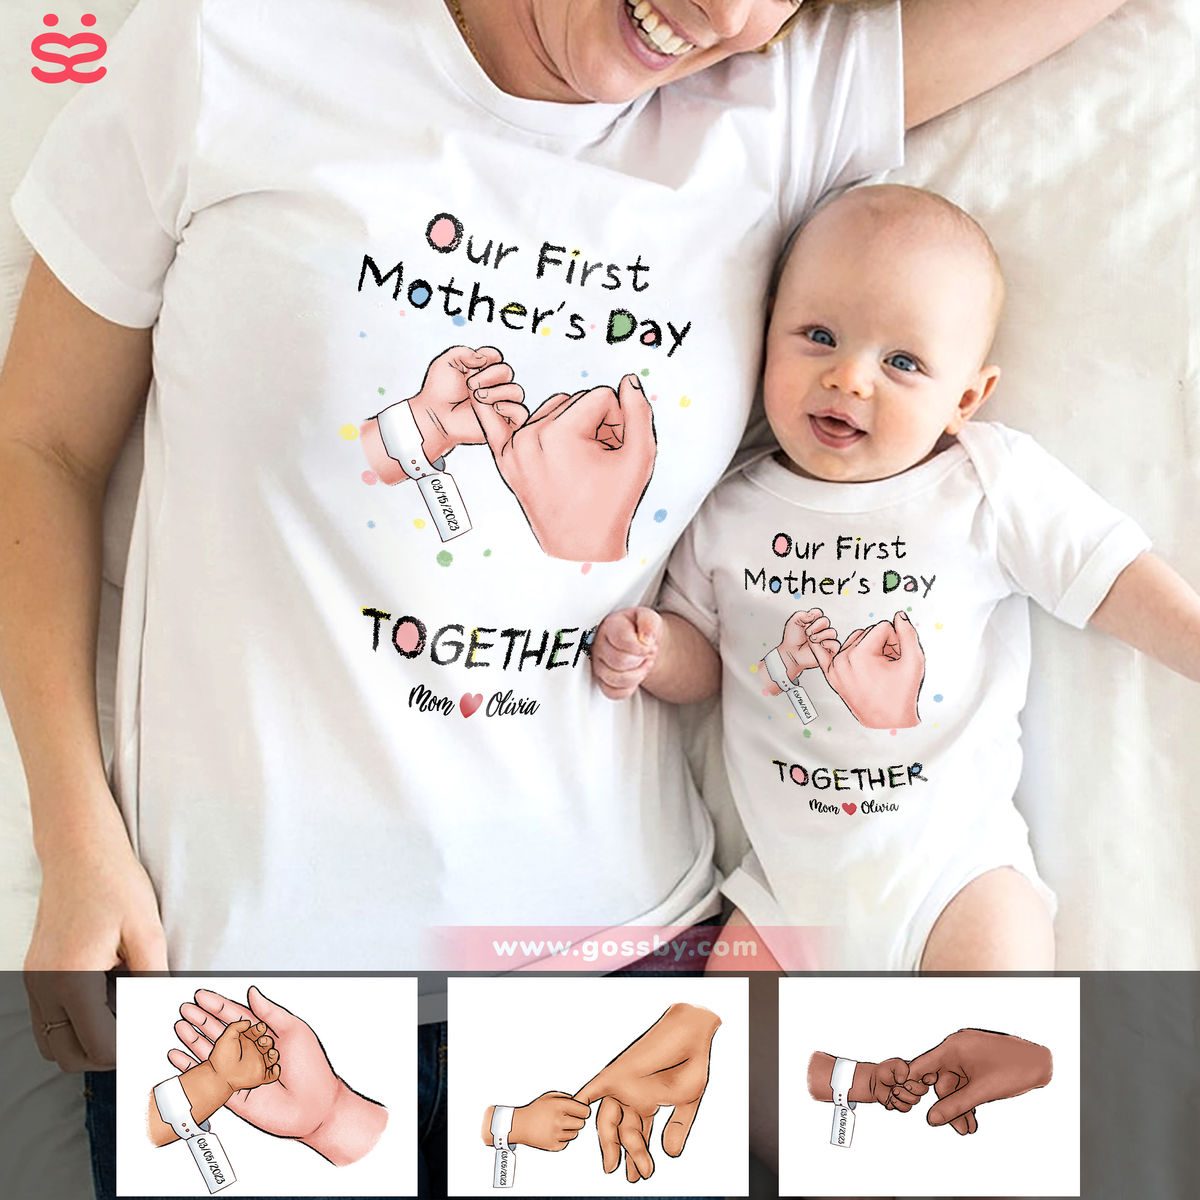 First Mother's Day - Our First Mother's Day Matching Outfit (Onesie and TShirt Set) - Mother and Child Hand